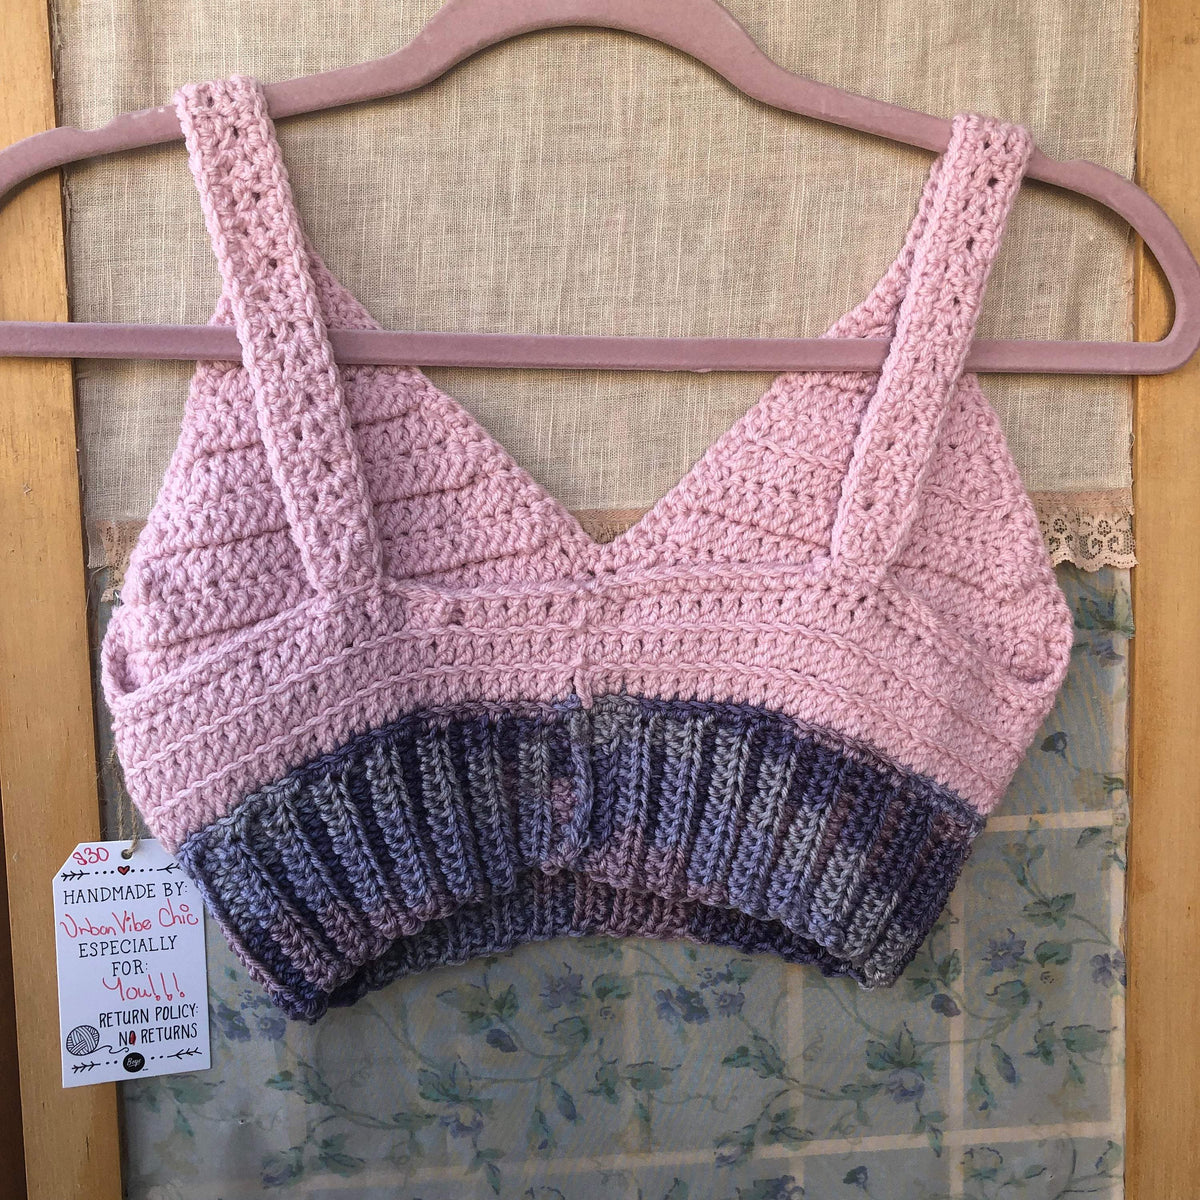 Crochet Bralette, Merino Wool Top for Summer, Hand-crocheted Crop Top,  Crochet Clothing Accessory, More Colors Available 